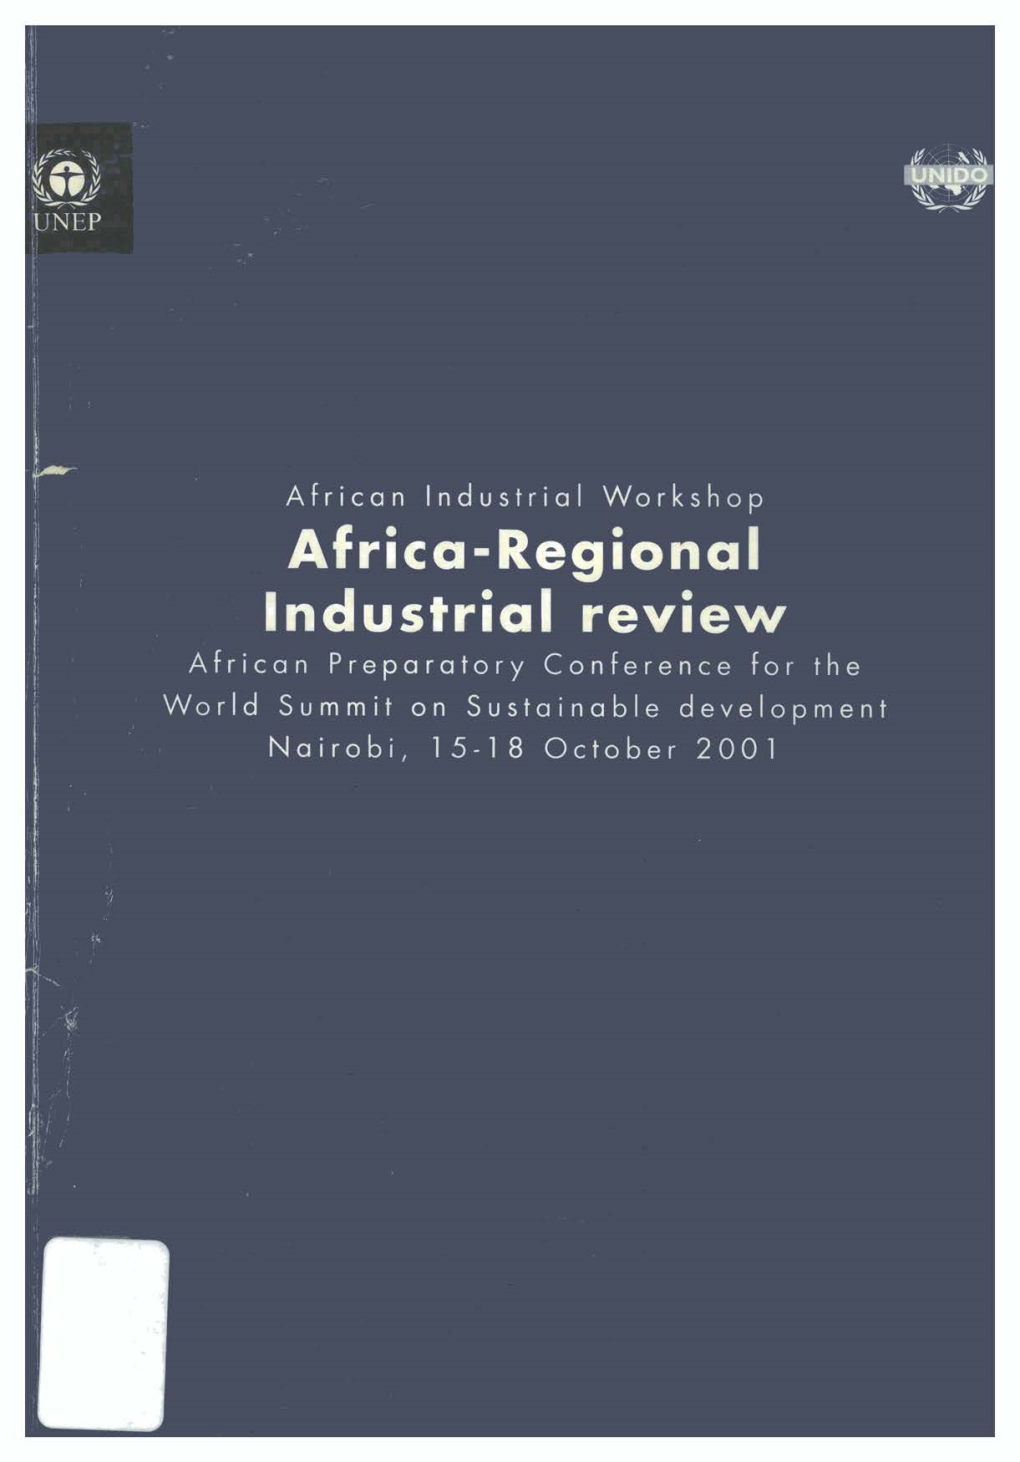 Africa=Regional Industrial Review African Preparatory Conference for the World Summit on Sustainable Development Nairobi, 15-18 October 2001 UNID9 UNEP